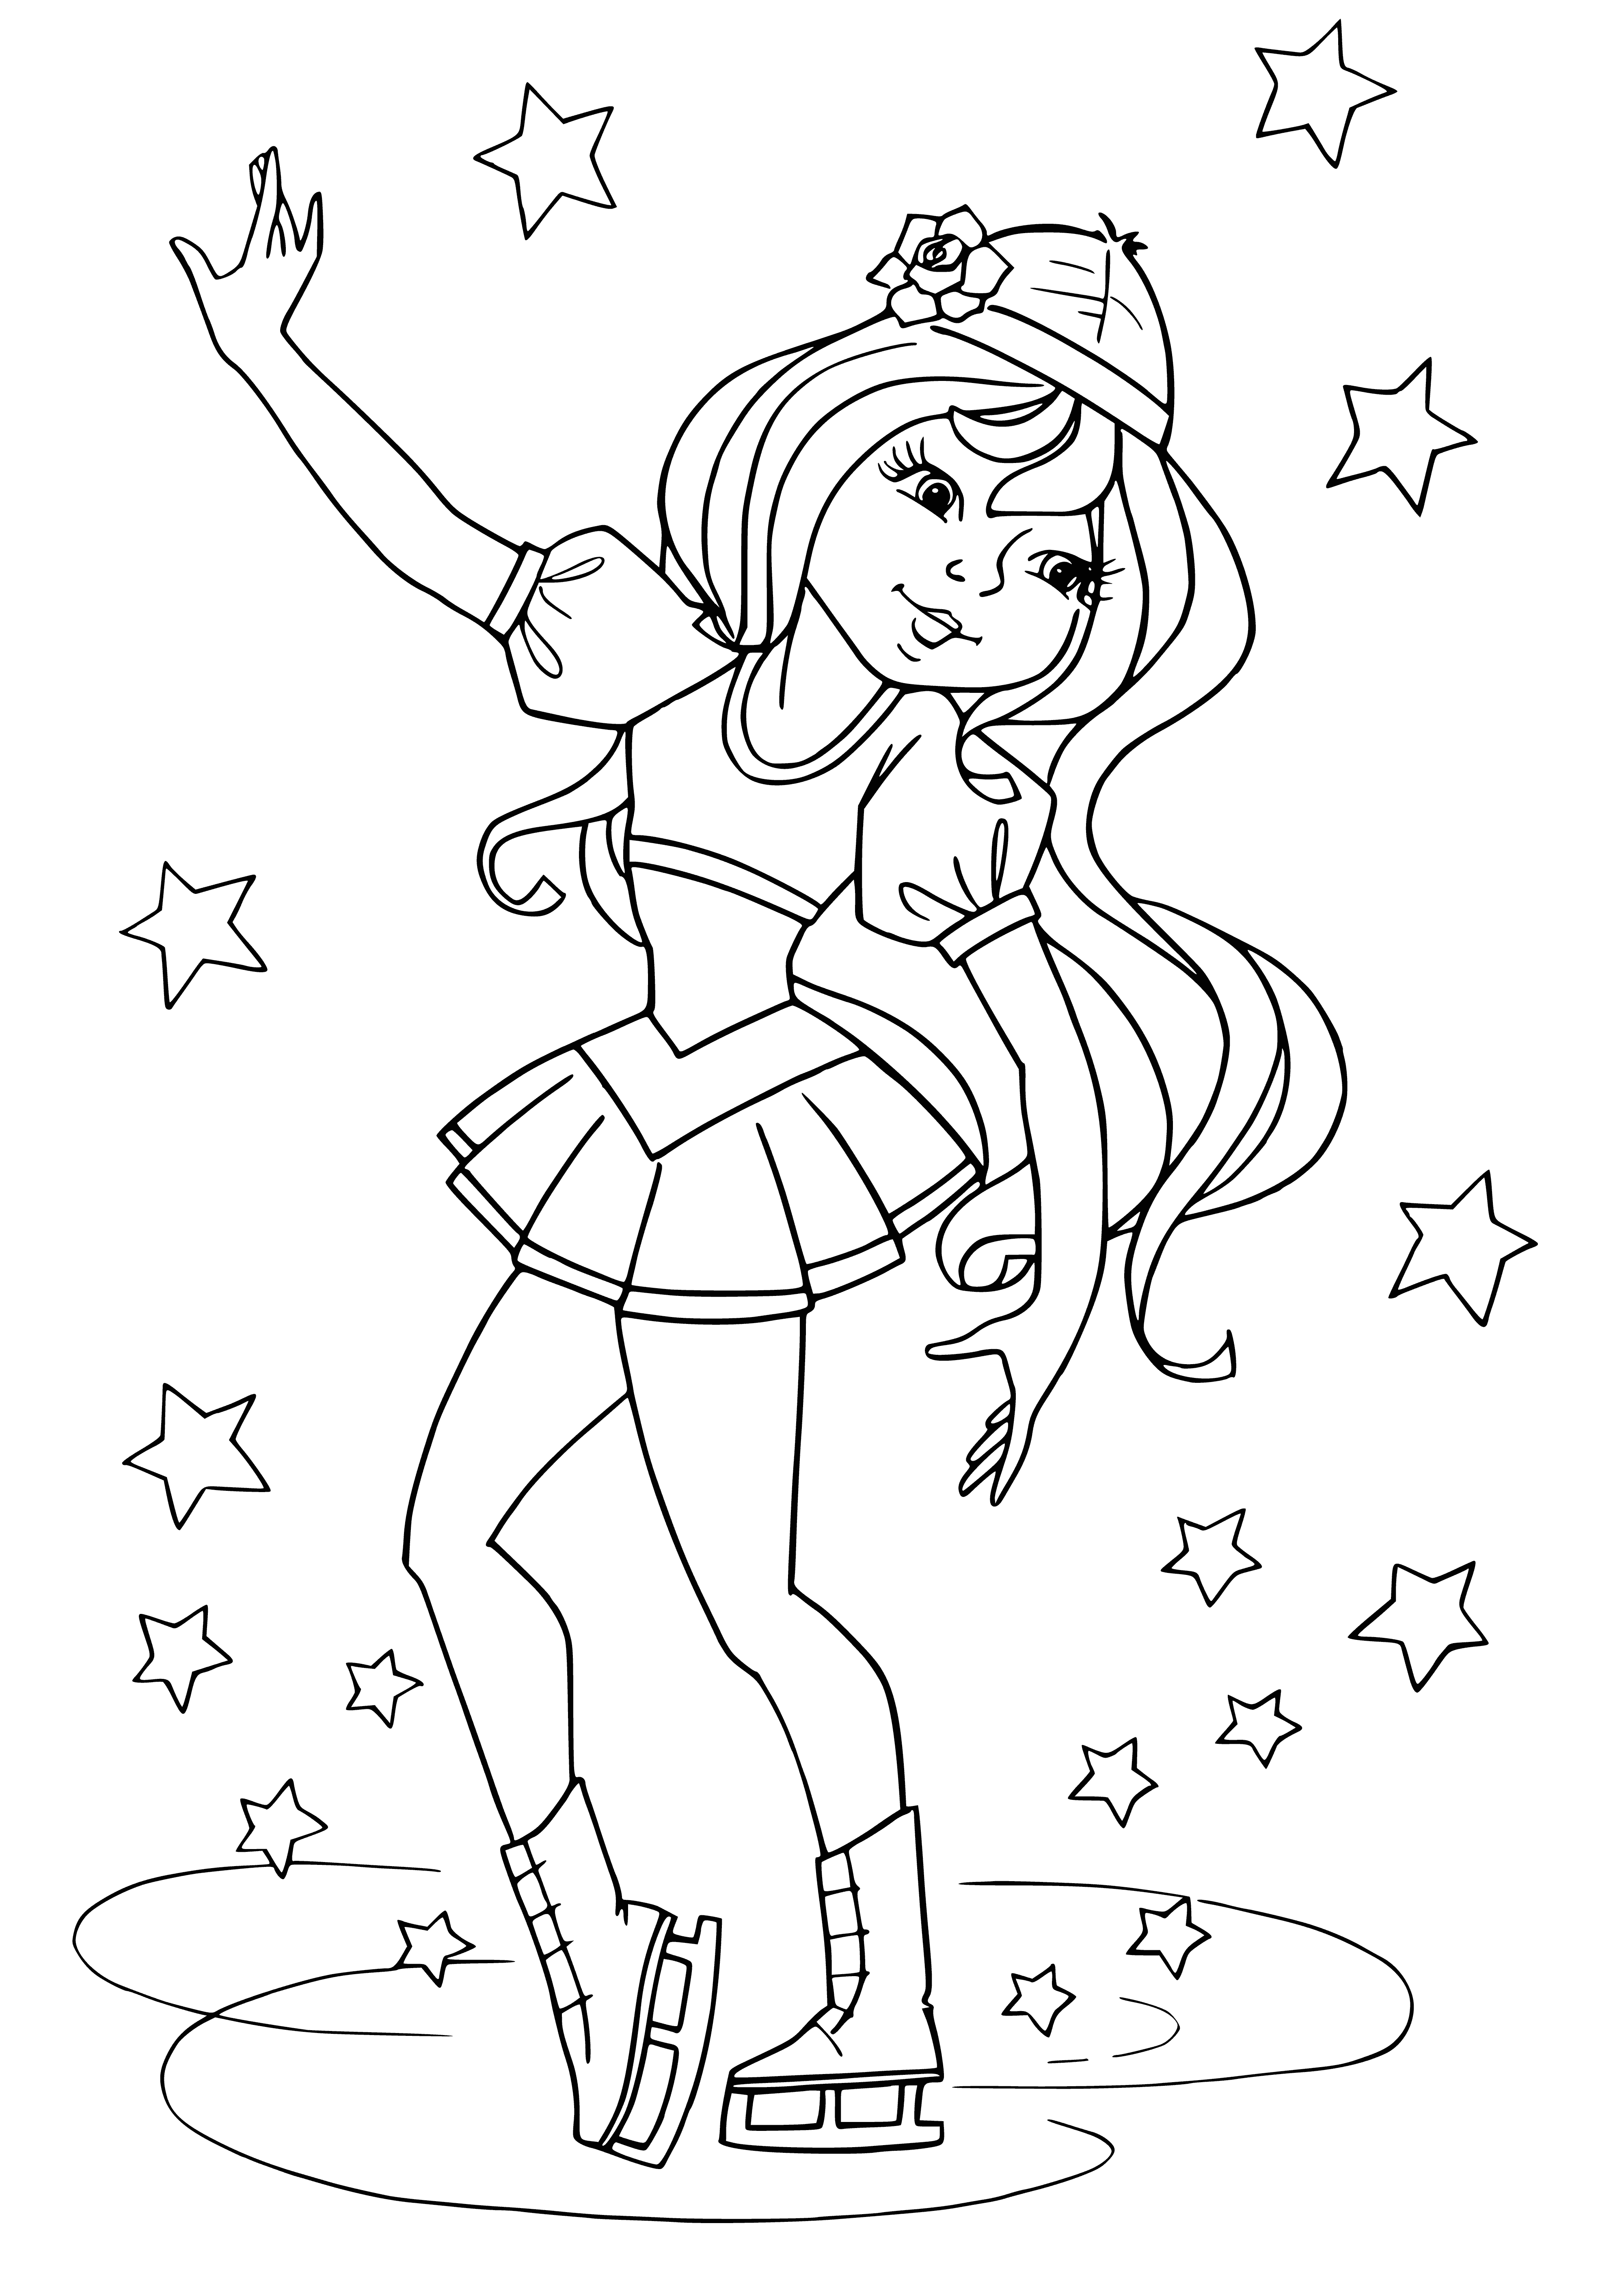 coloring page: Figure skaters combine athleticism, power, flexibility & artistry to move gracefully across the ice with complex jumps & lifts.